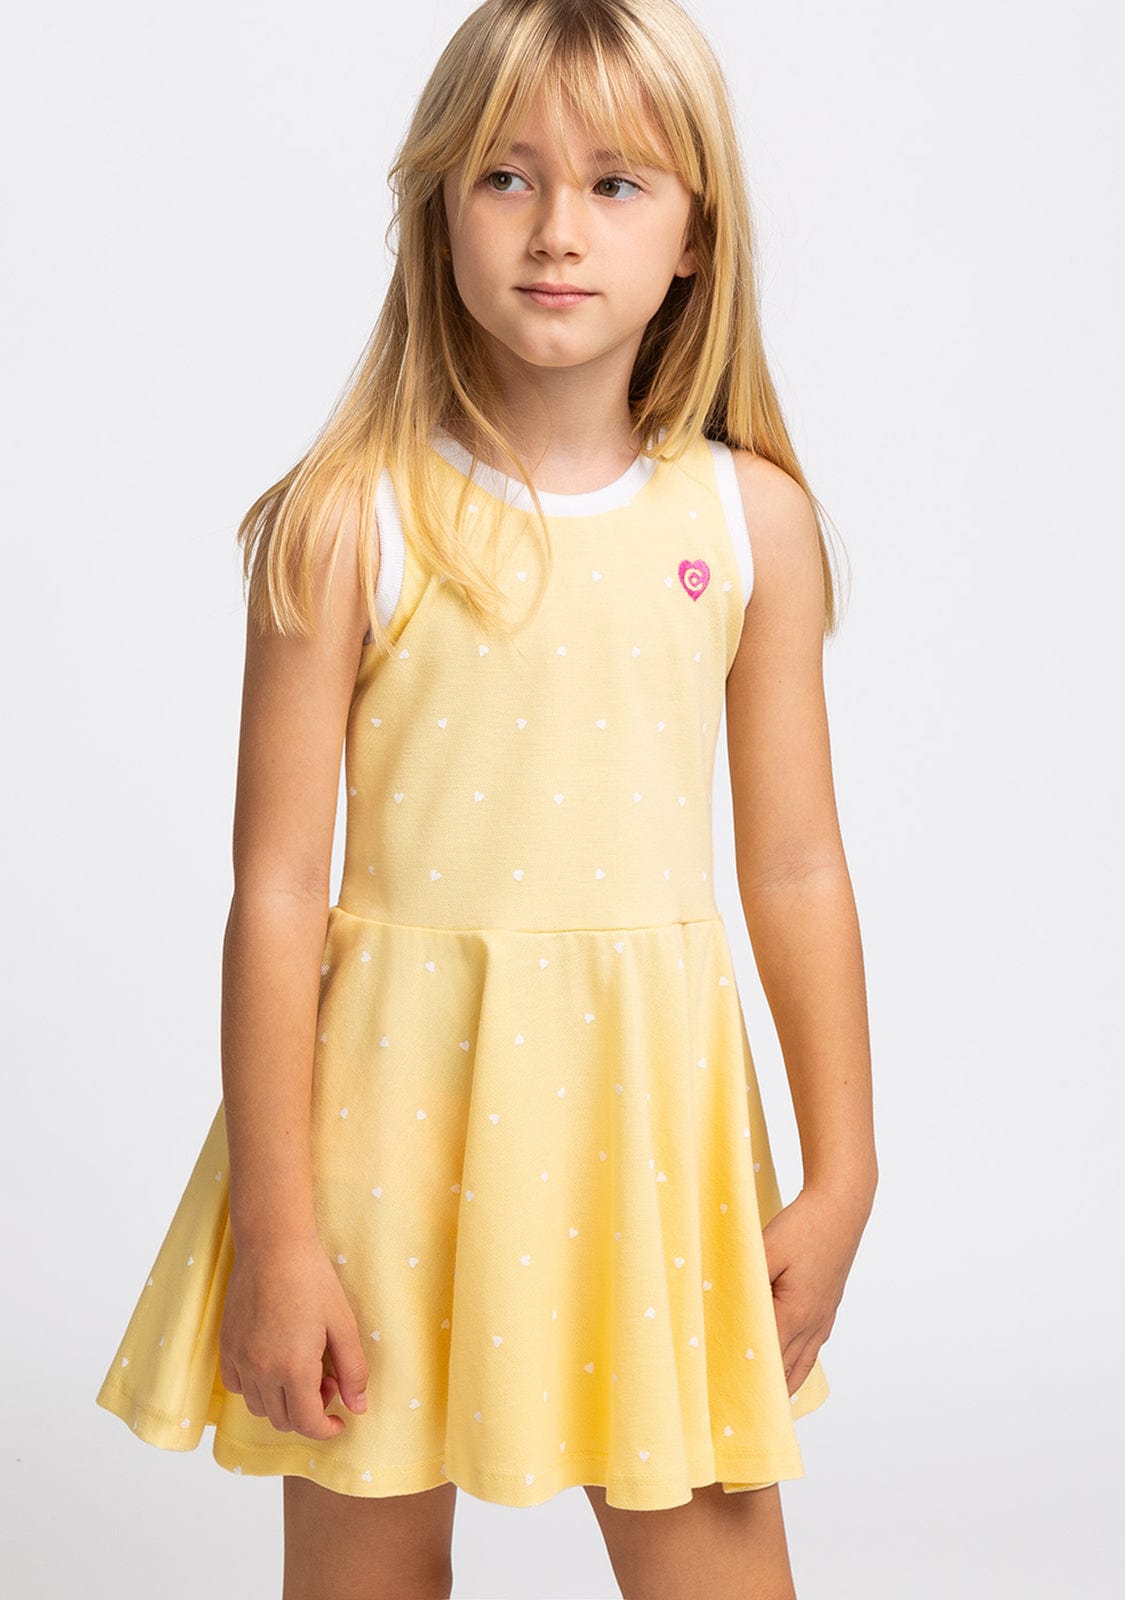 CONGUITOS TEXTIL Clothing Girl's Yellow Hearts Skater Dress